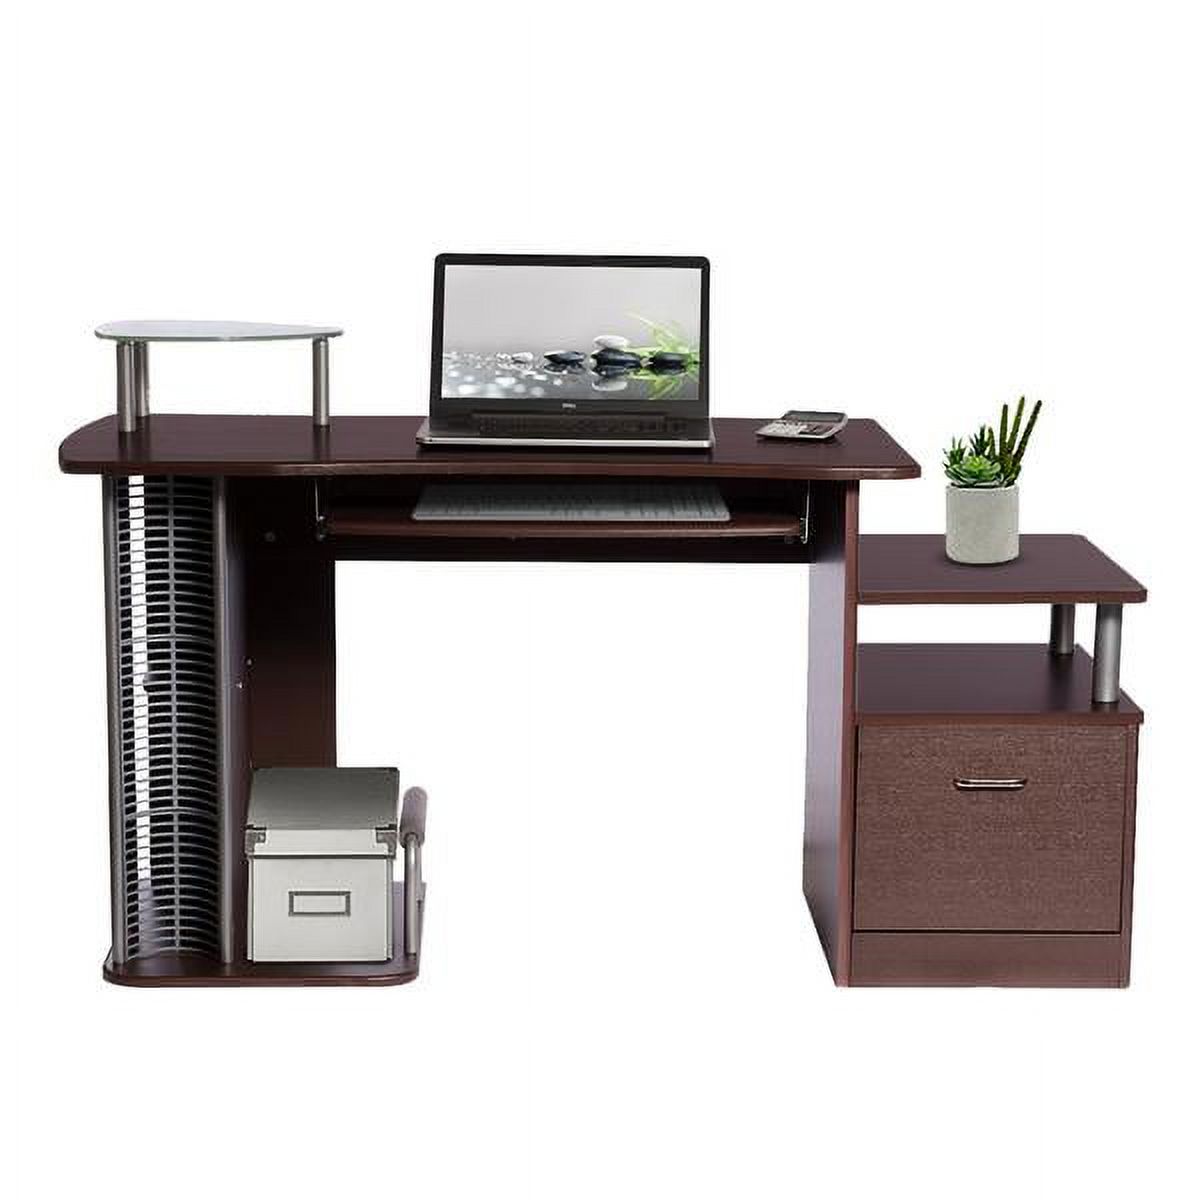 Techni Mobili Complete Computer Workstation Desk with Storage and Media Rack RTA-2202, Chocolate - image 1 of 4